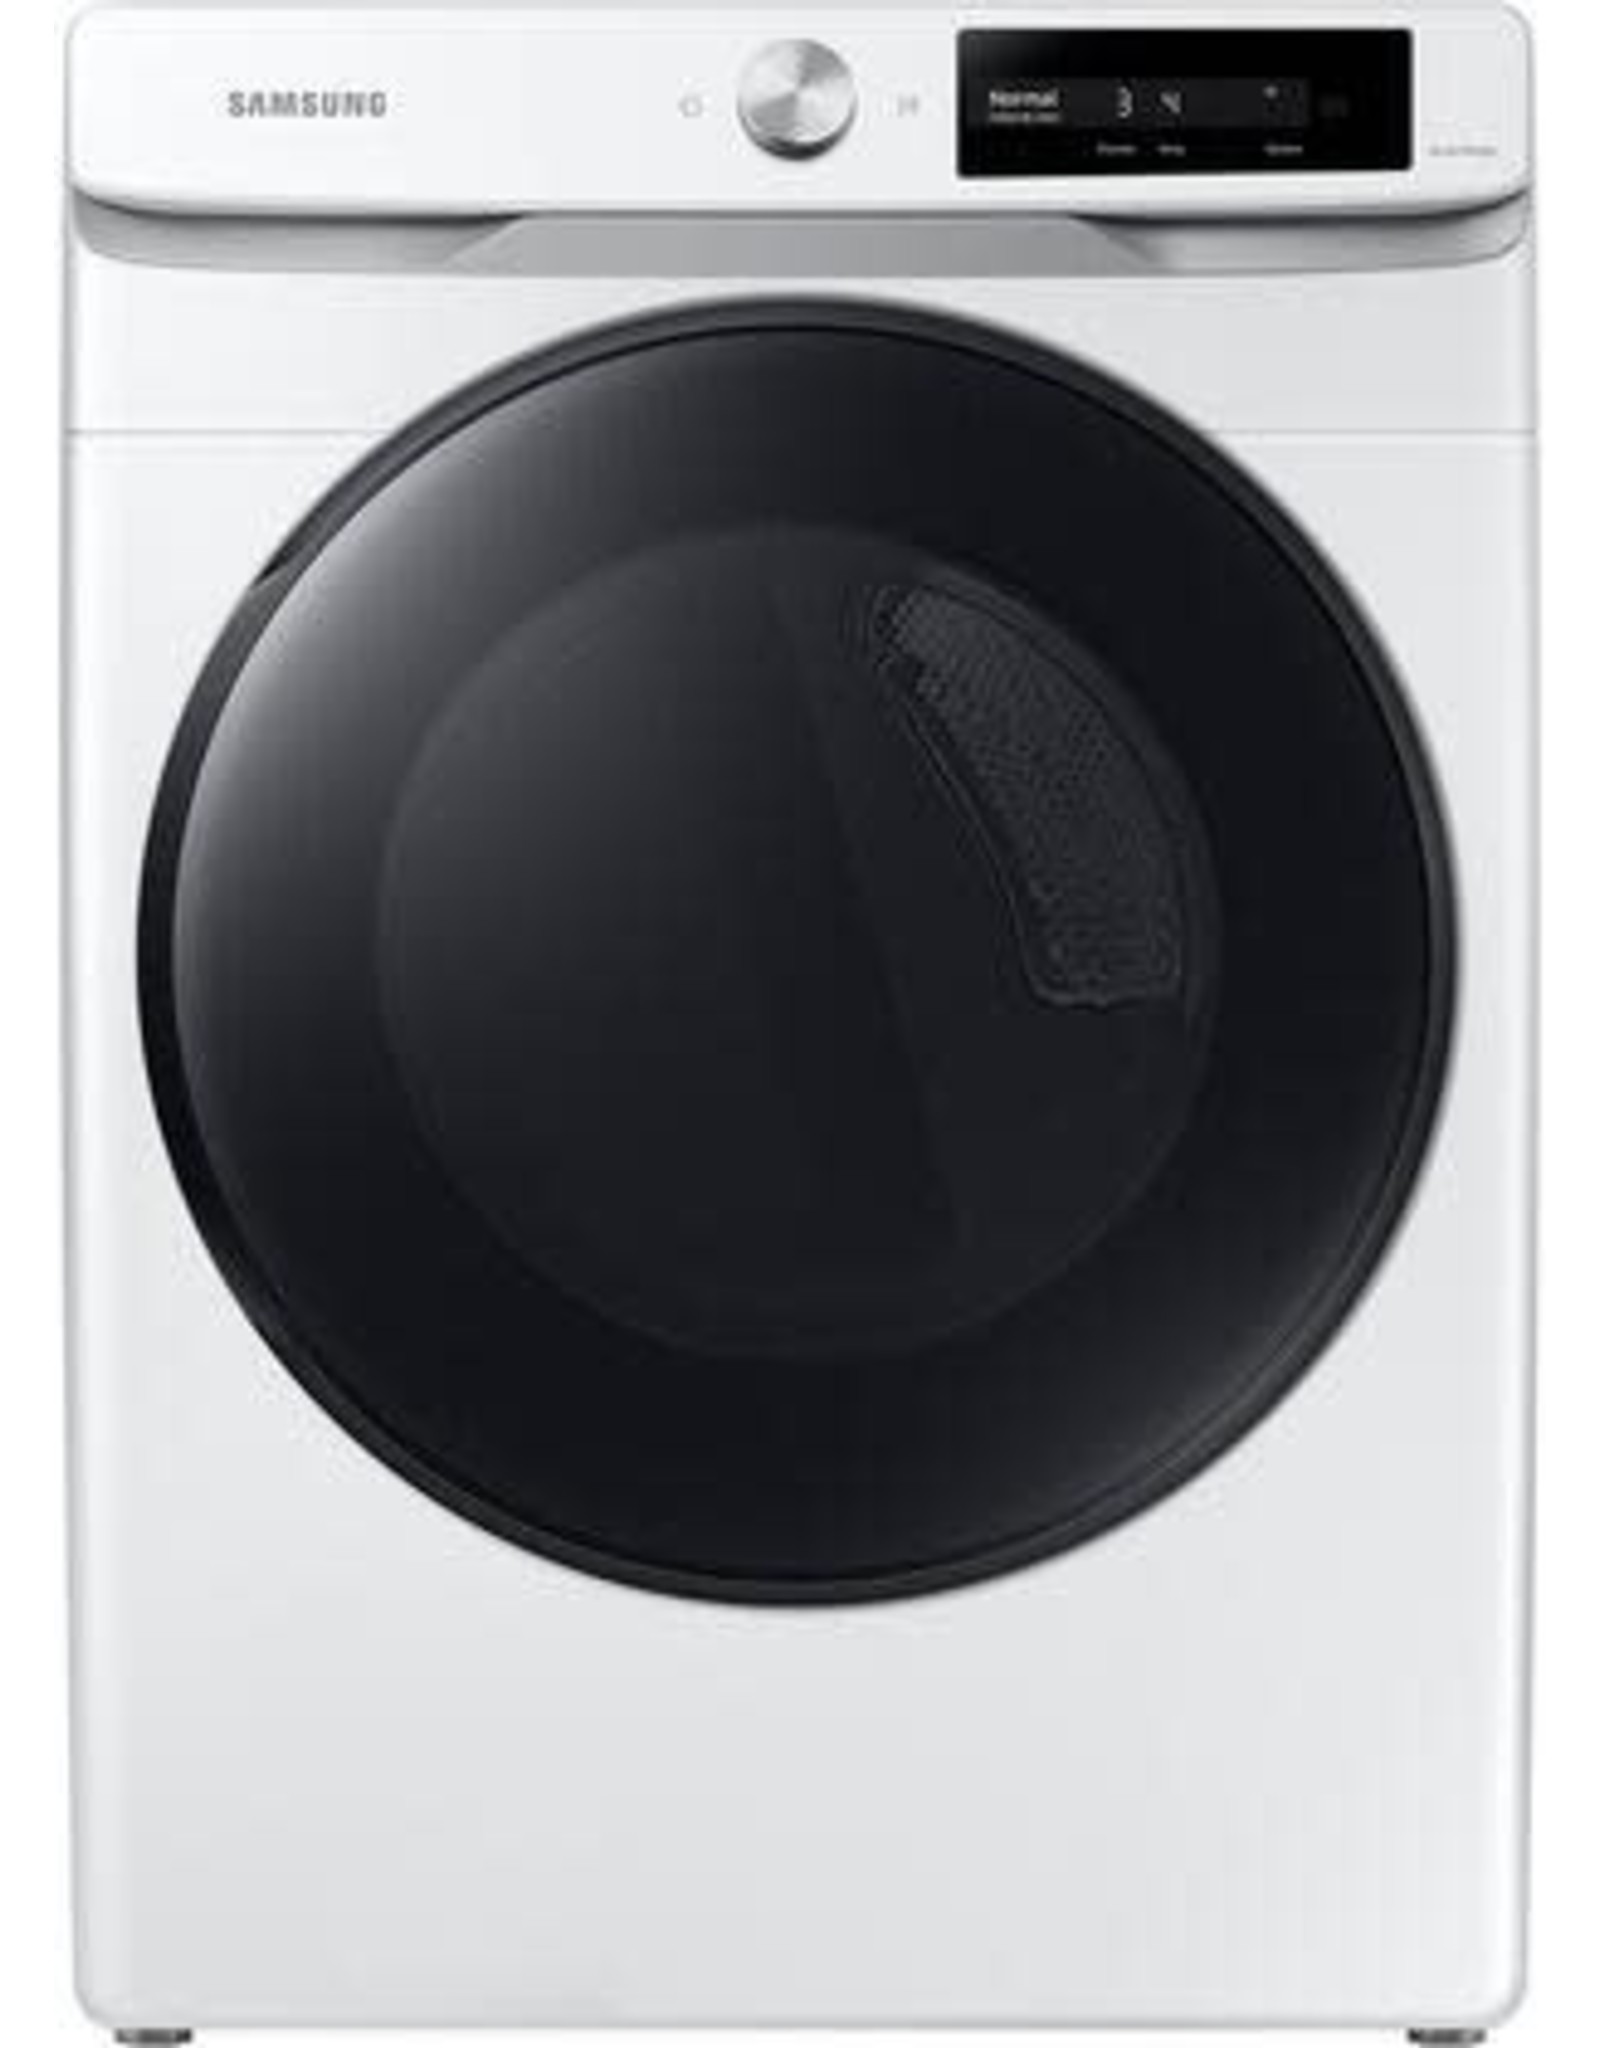 NEW WF45A6400AW  4.5 cu. ft. Large Capacity Smart Dial Front Load Washer with Super Speed Wash in White